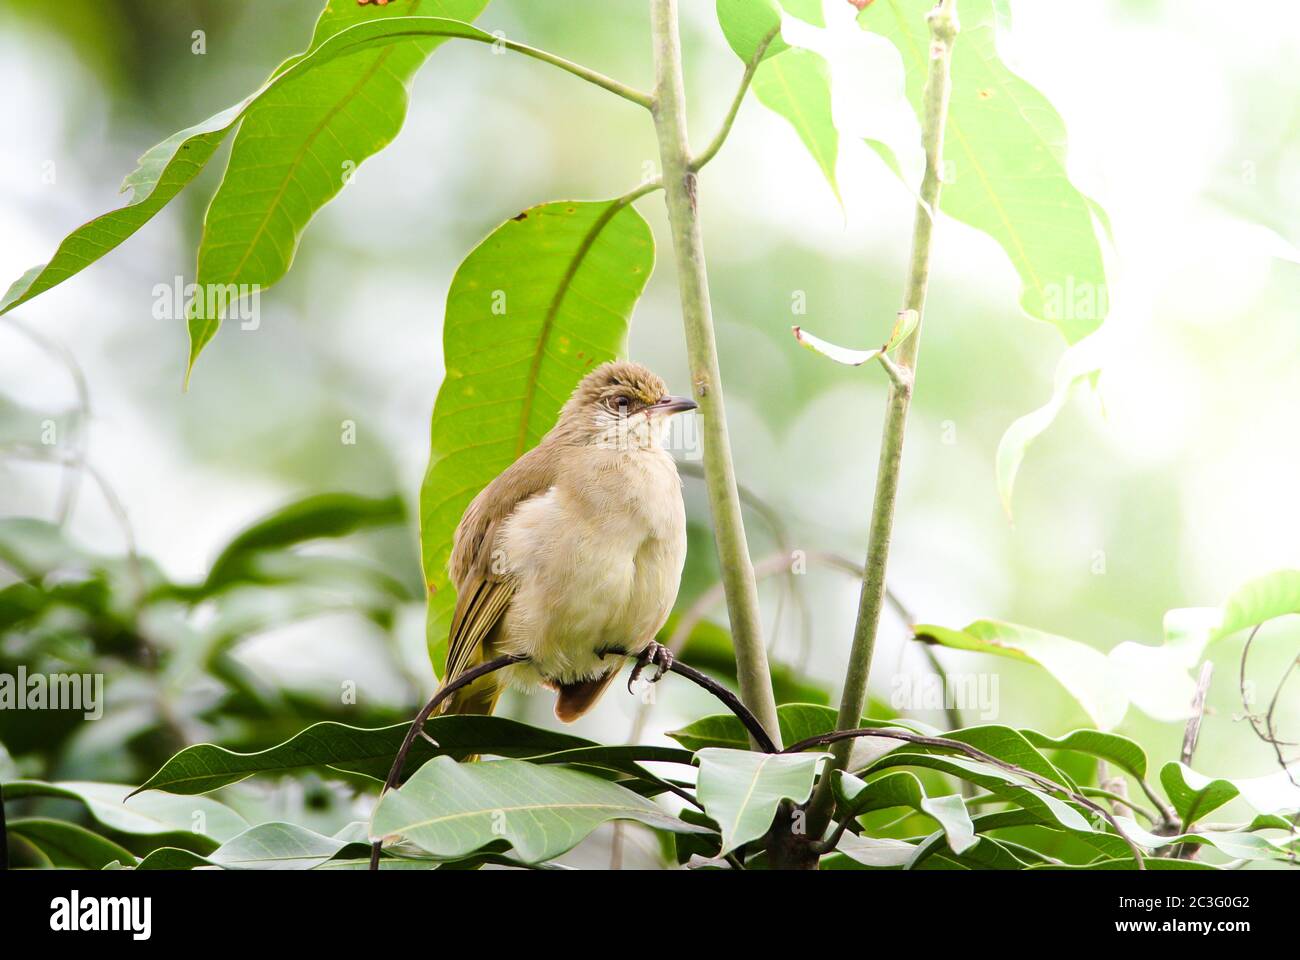 Streak-eared bulbul's standing on branches in the forest. Bird's in the nature background. Stock Photo